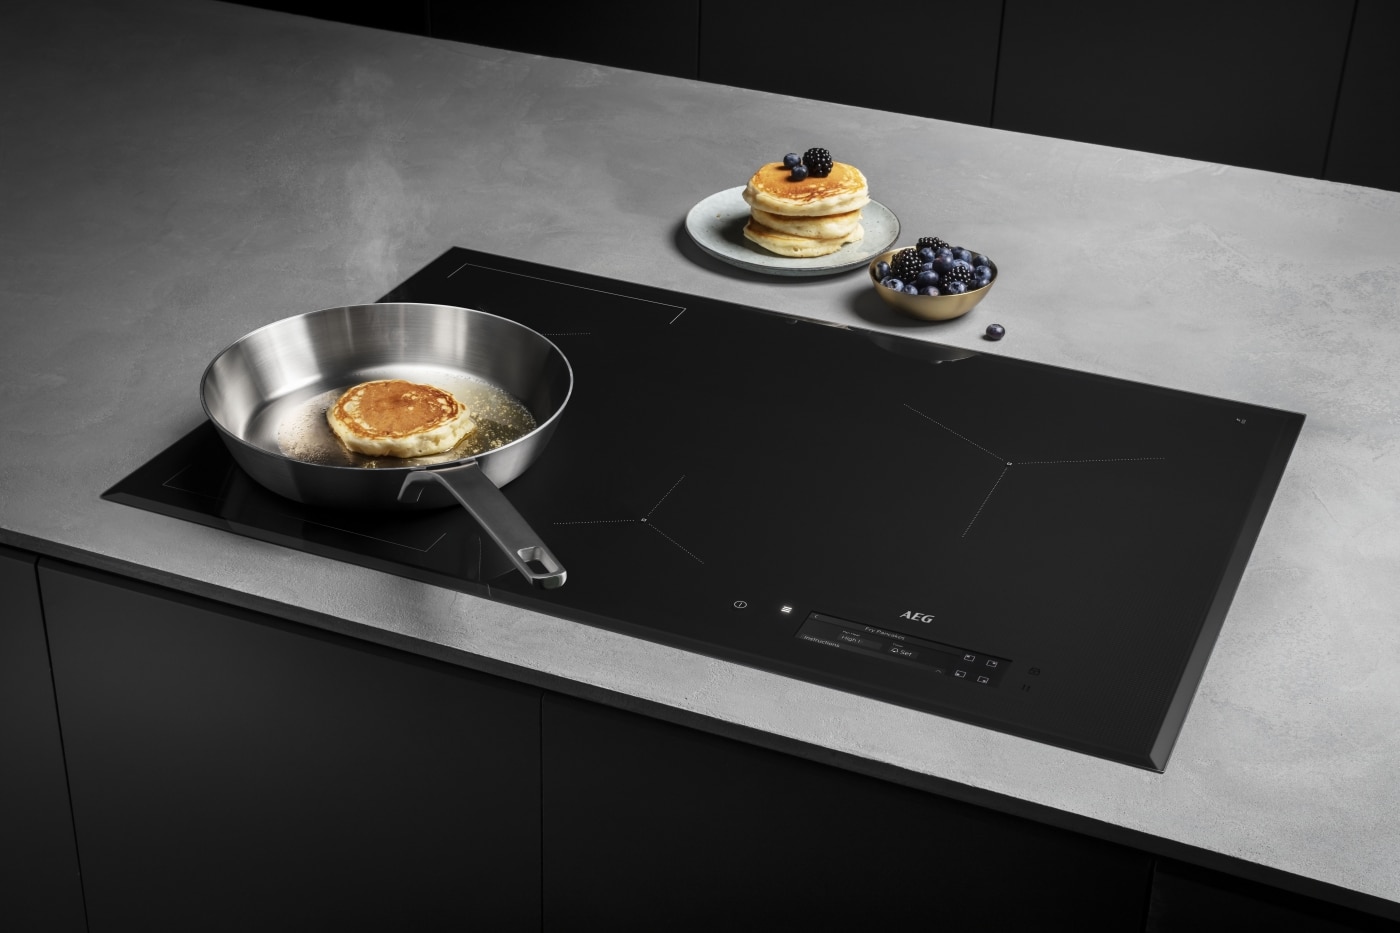 Flawless Flameless: Mastering the Art of Cooking with an Electric Cooktop